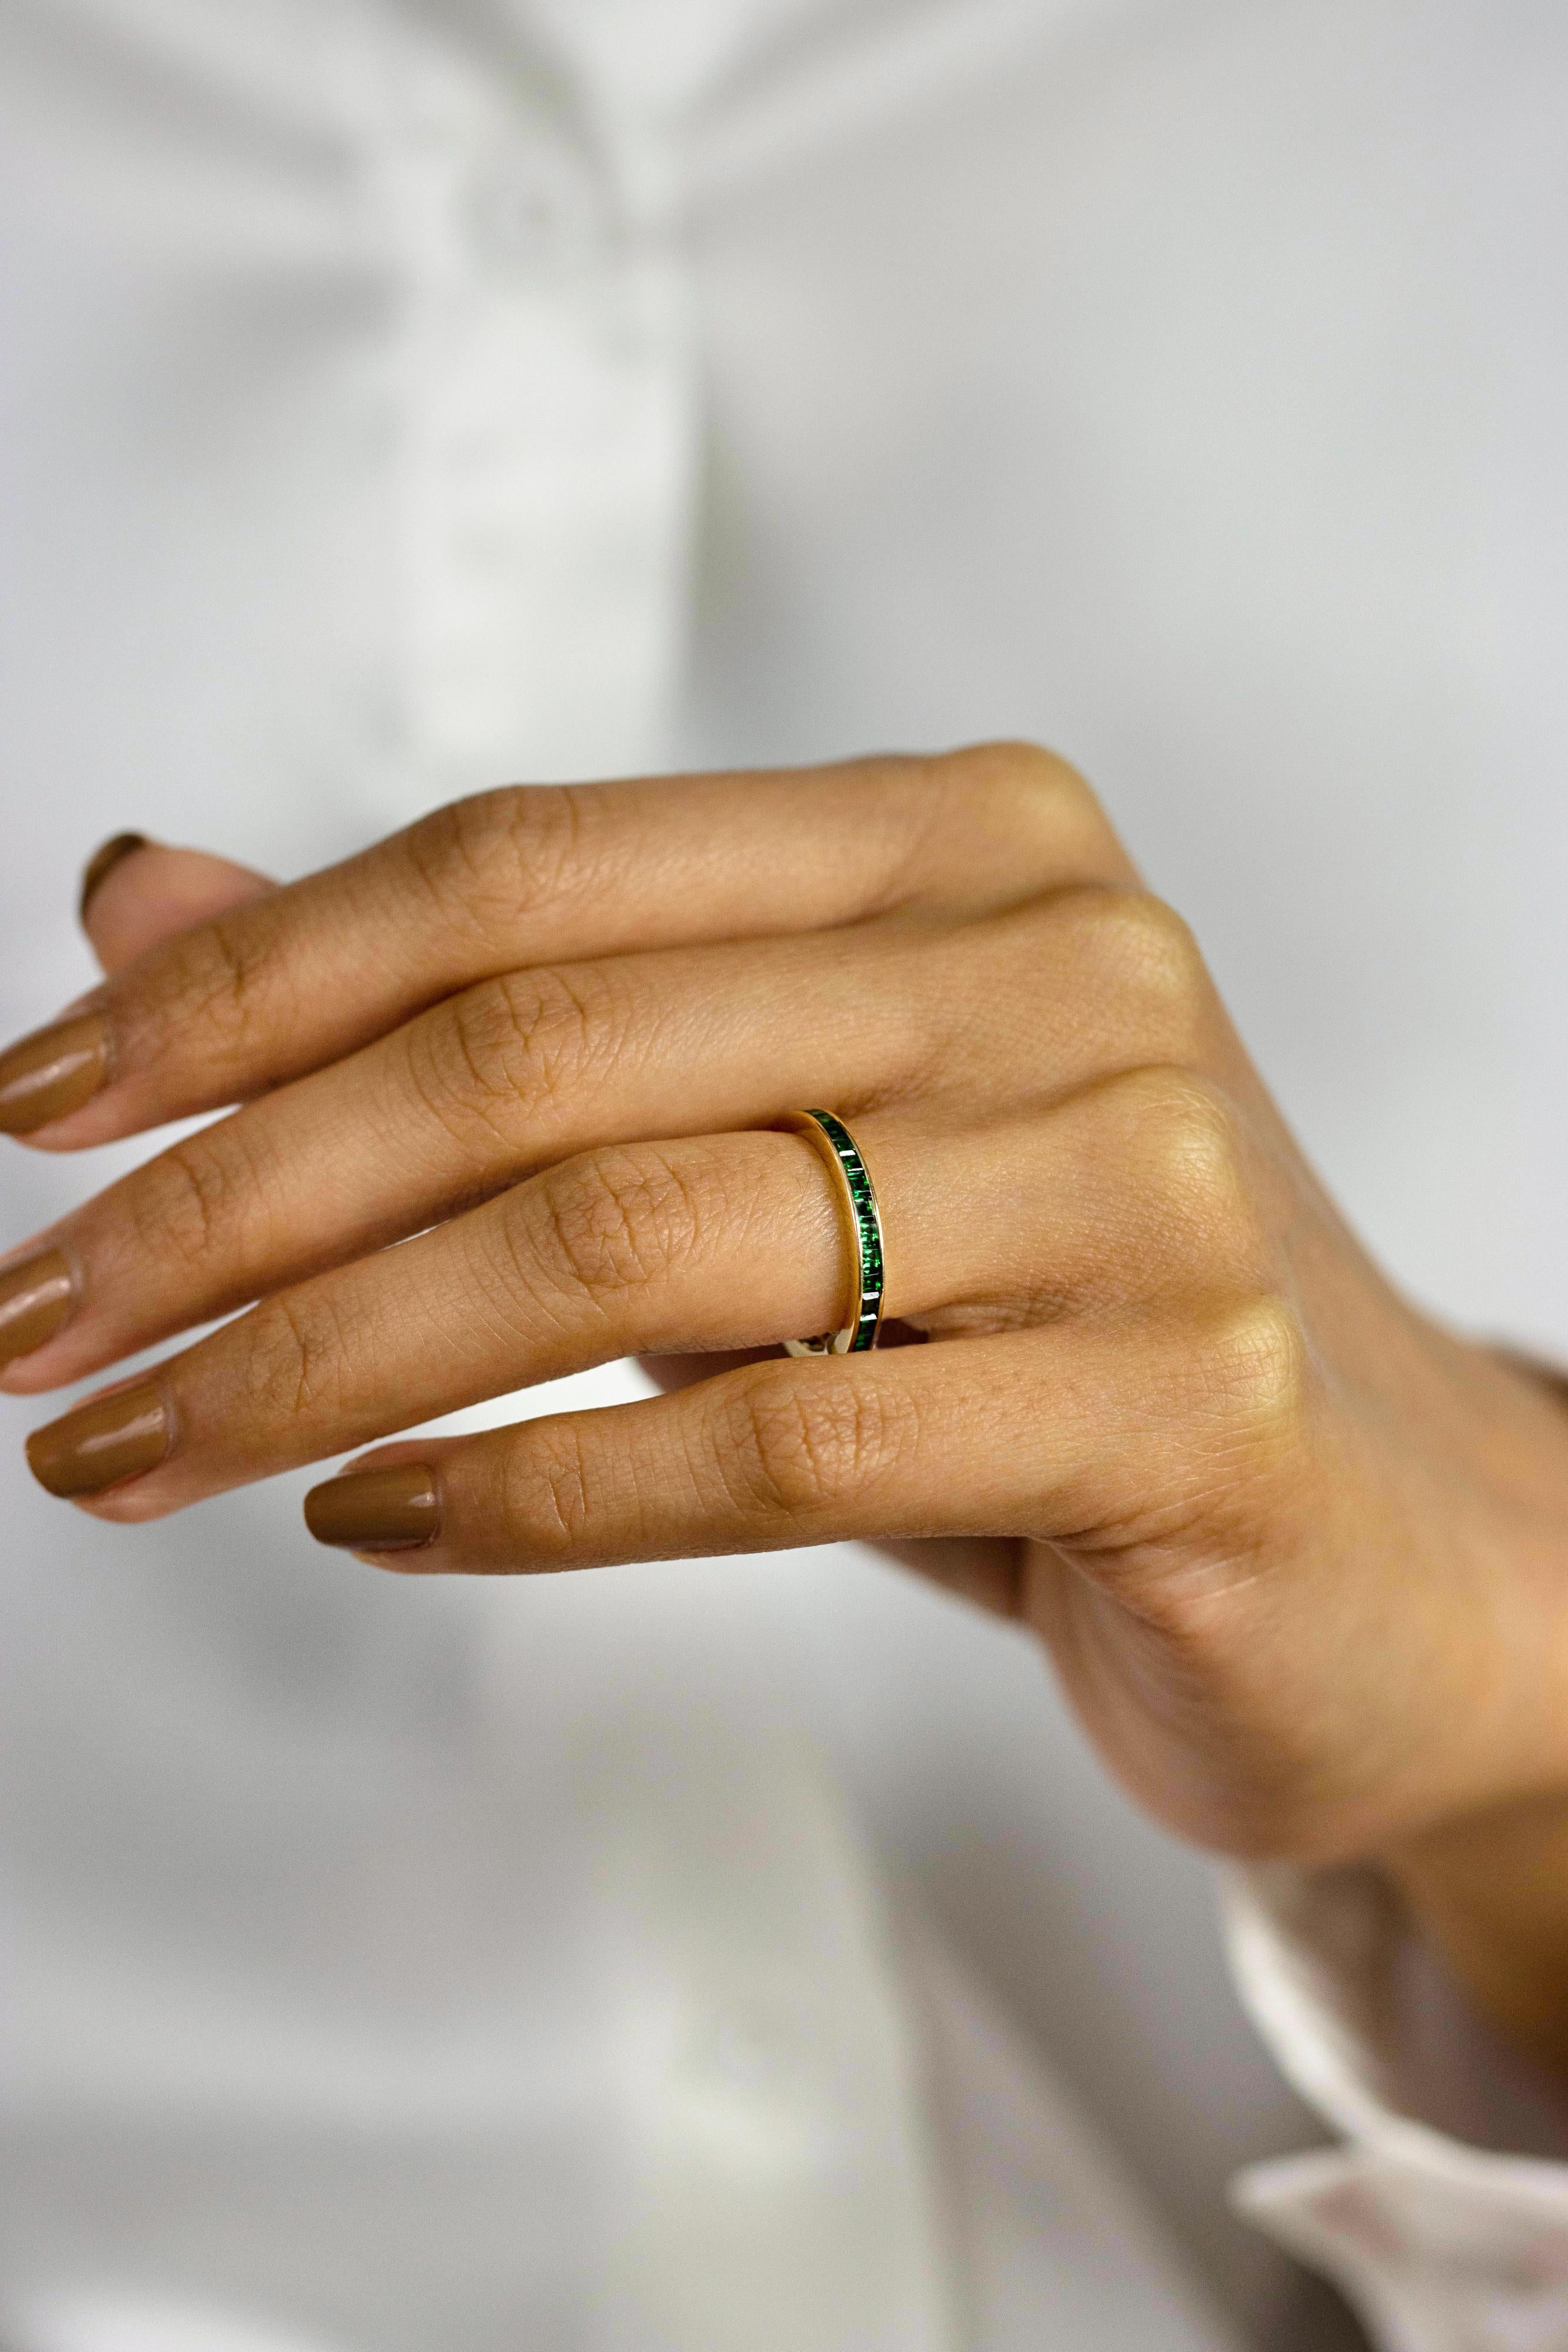 A gorgeous eternity wedding band ring featuring square cut emerald-green tsavorite weighing 1.50 carats total. Channel set, Made in 14K Yellow Gold, Size 6 US resizable upon request.

Style available in different price ranges. Prices are based on